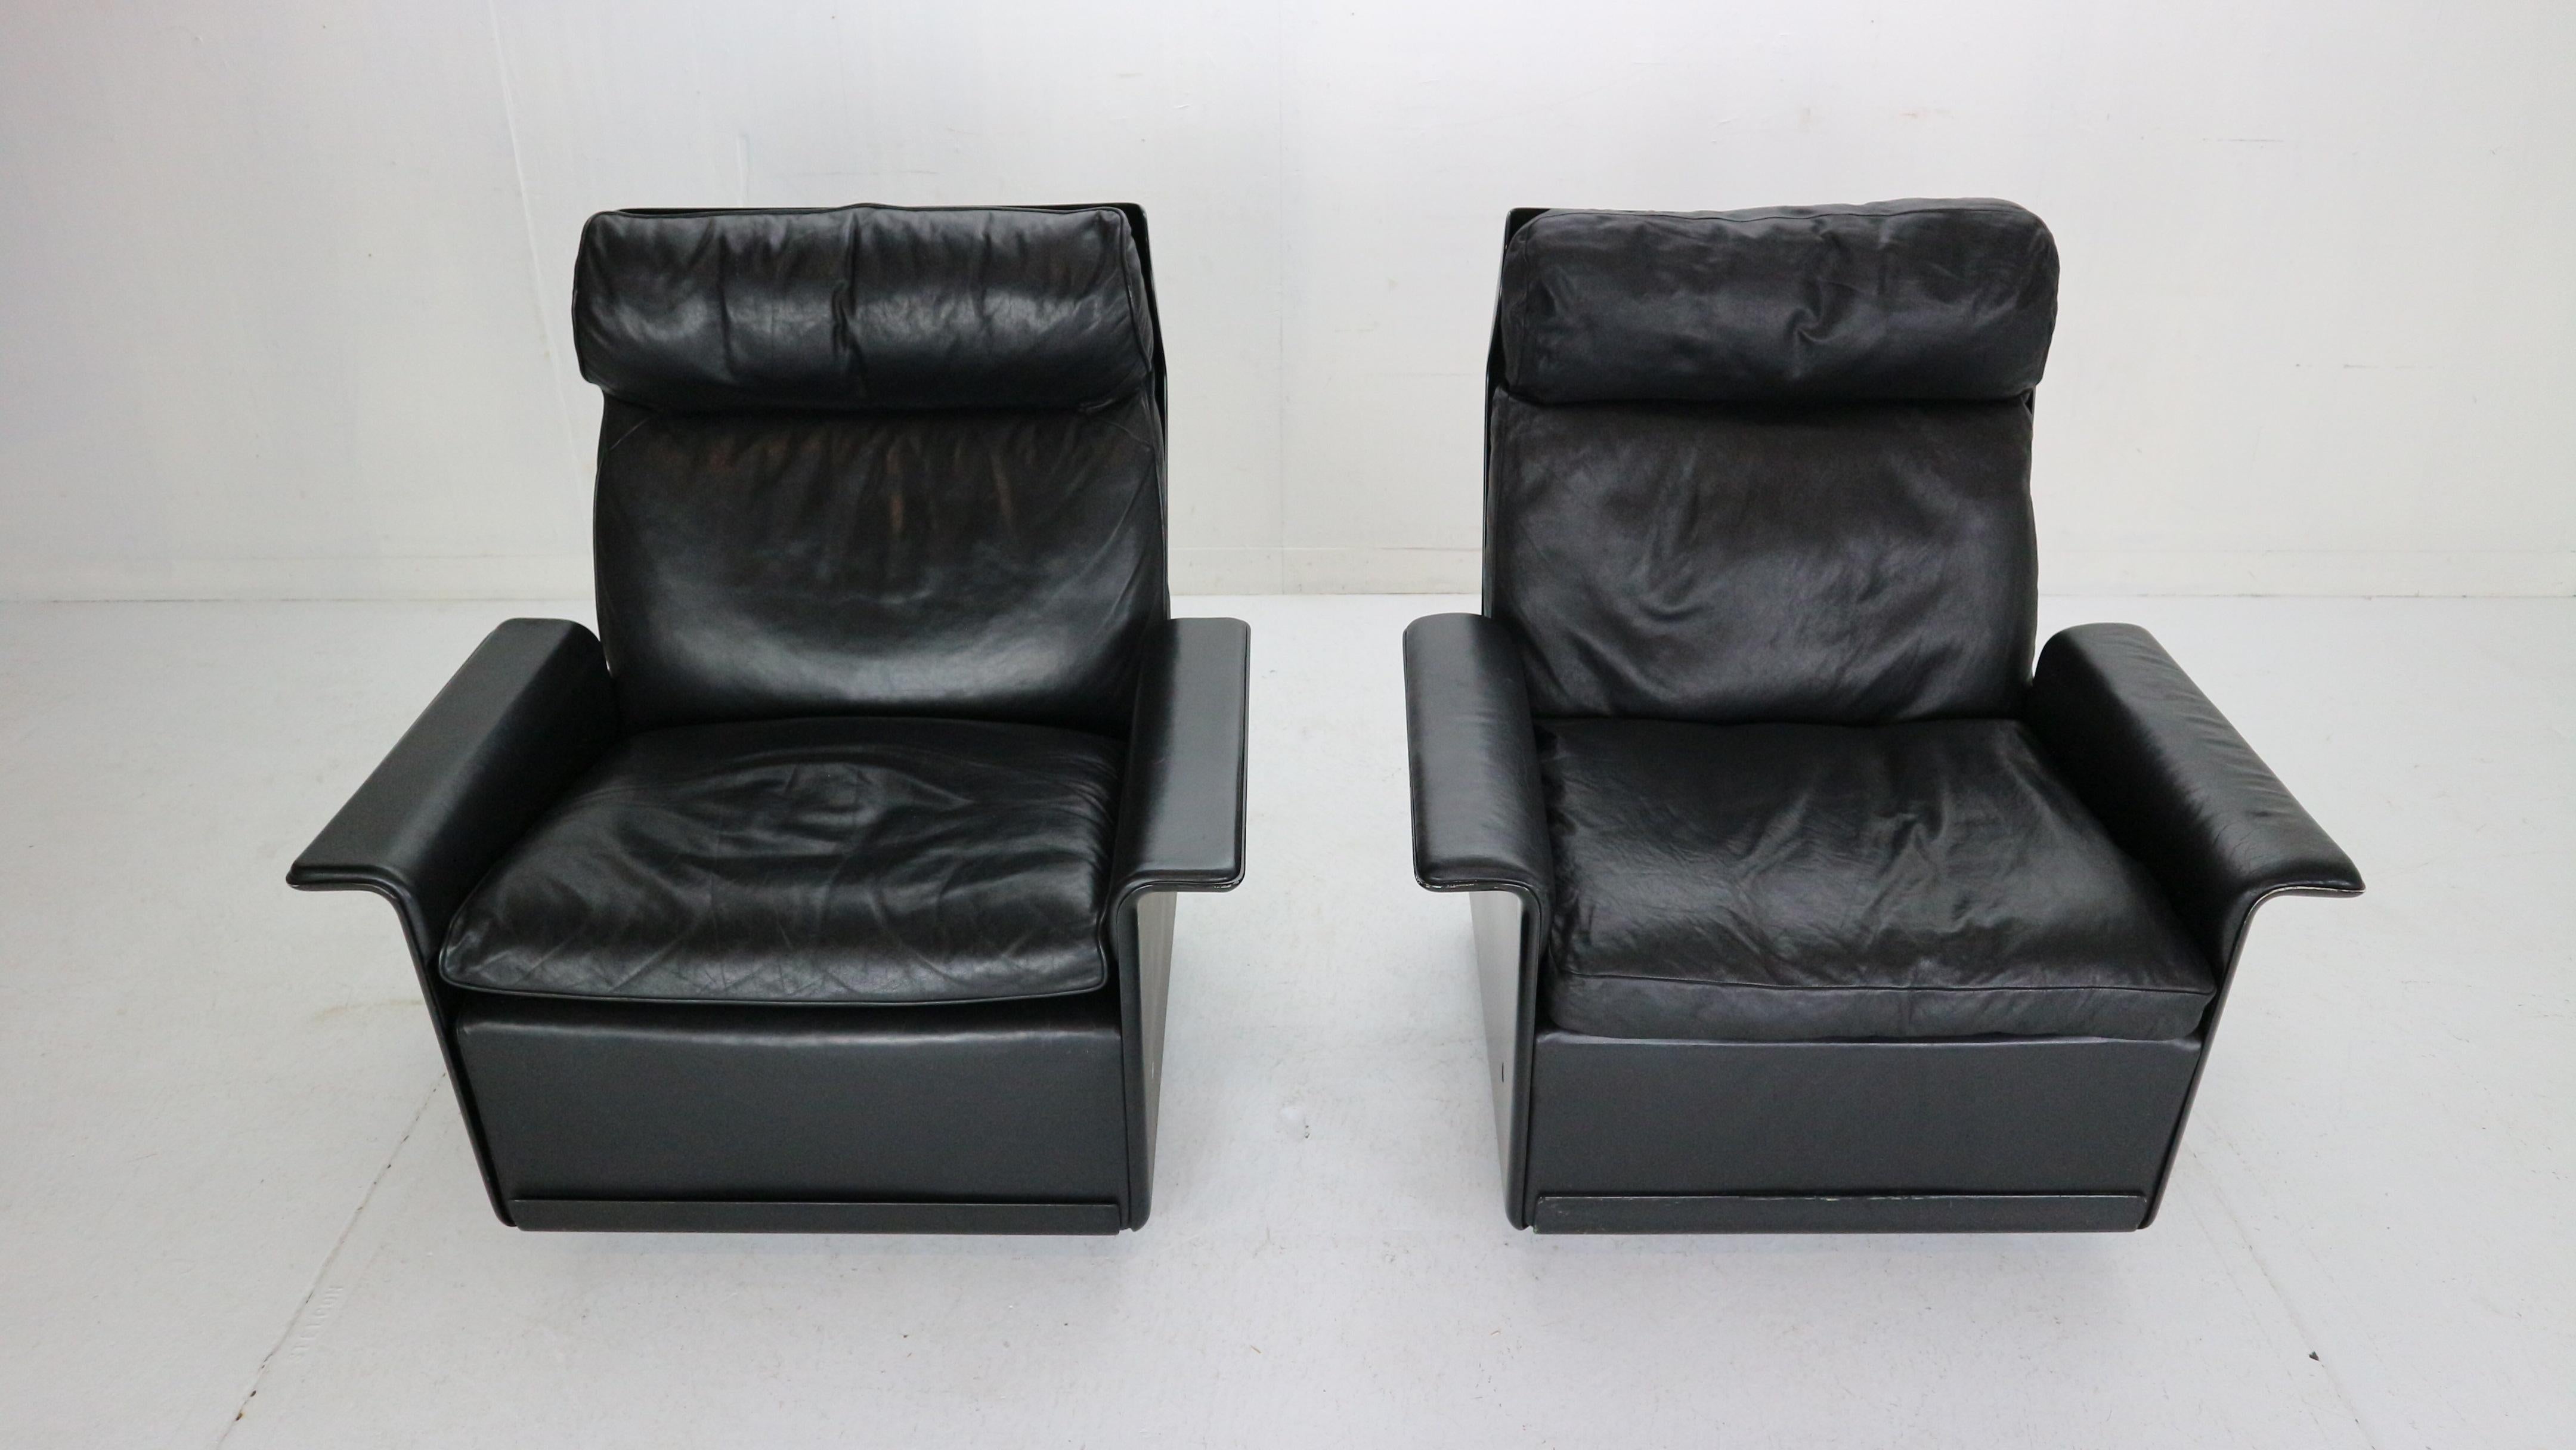 German Dieter Rams Set of 2 Black Leather Lounge Chairs Model-620 for Vitsœ, 1970s